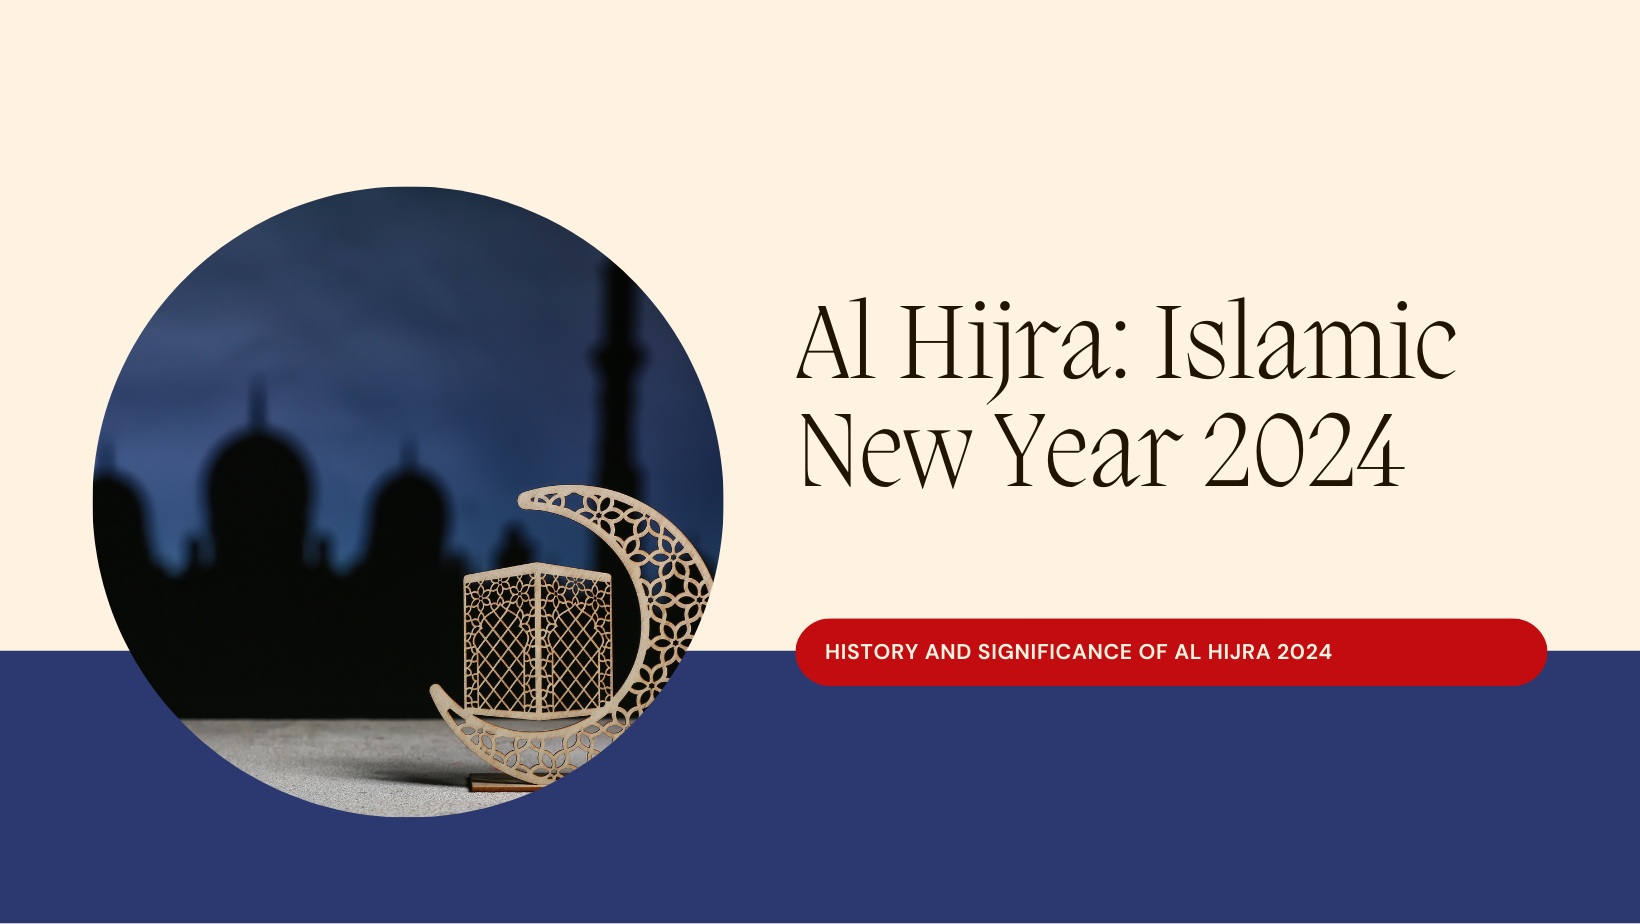 Al-Hijra (Islamic New Year) 2024: History, Meaning and Significance